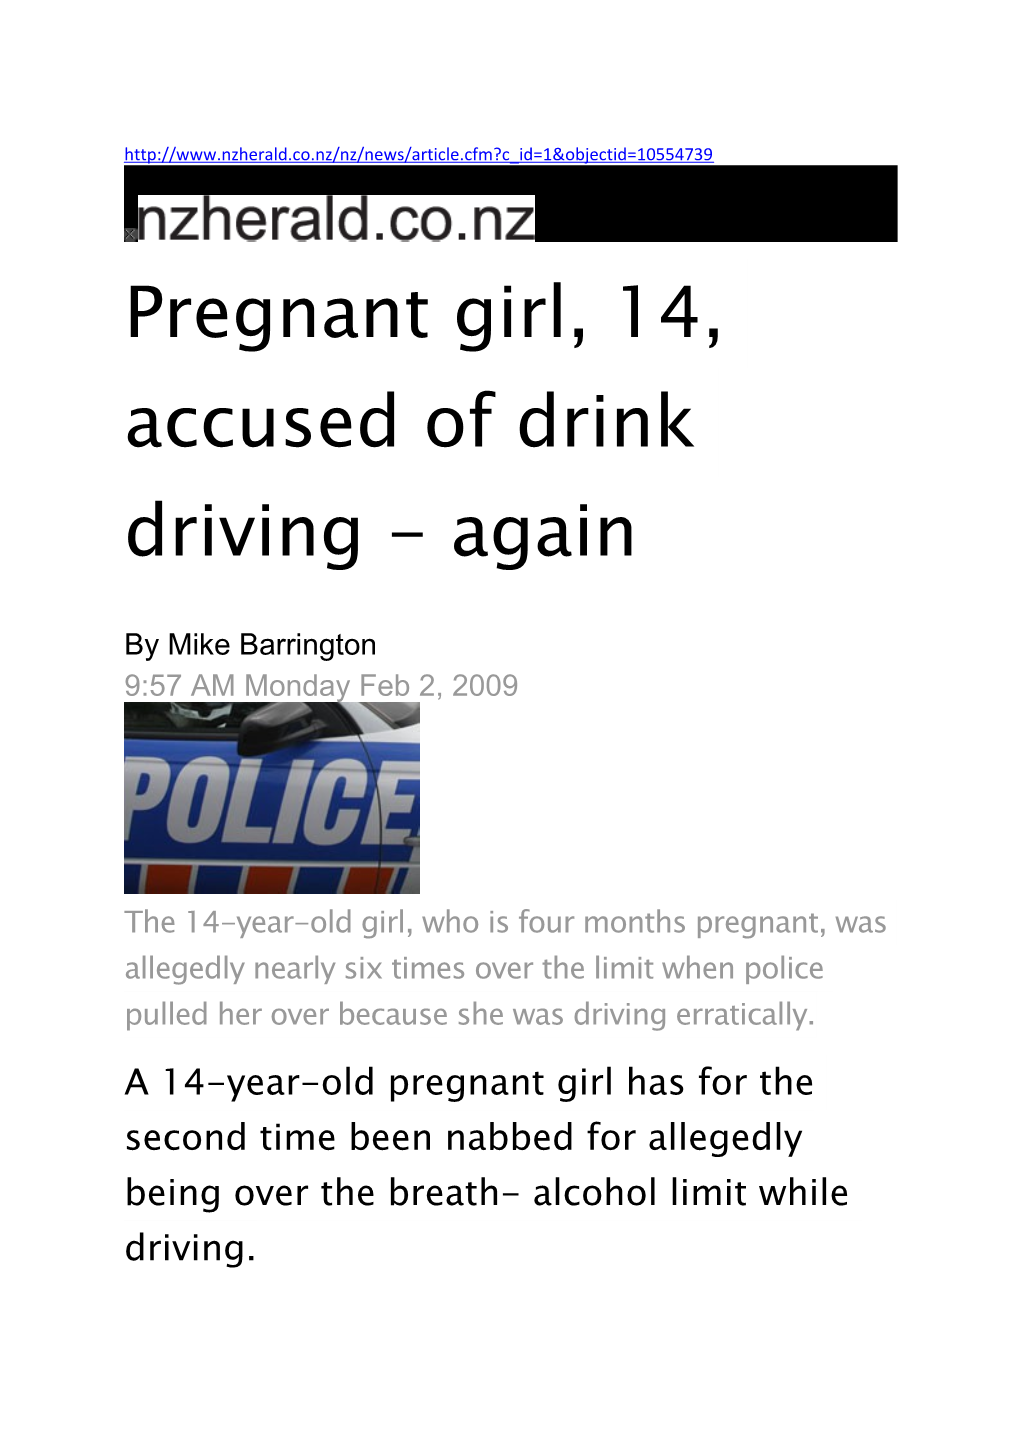 Pregnant Girl, 14, Accused of Drink Driving - Again